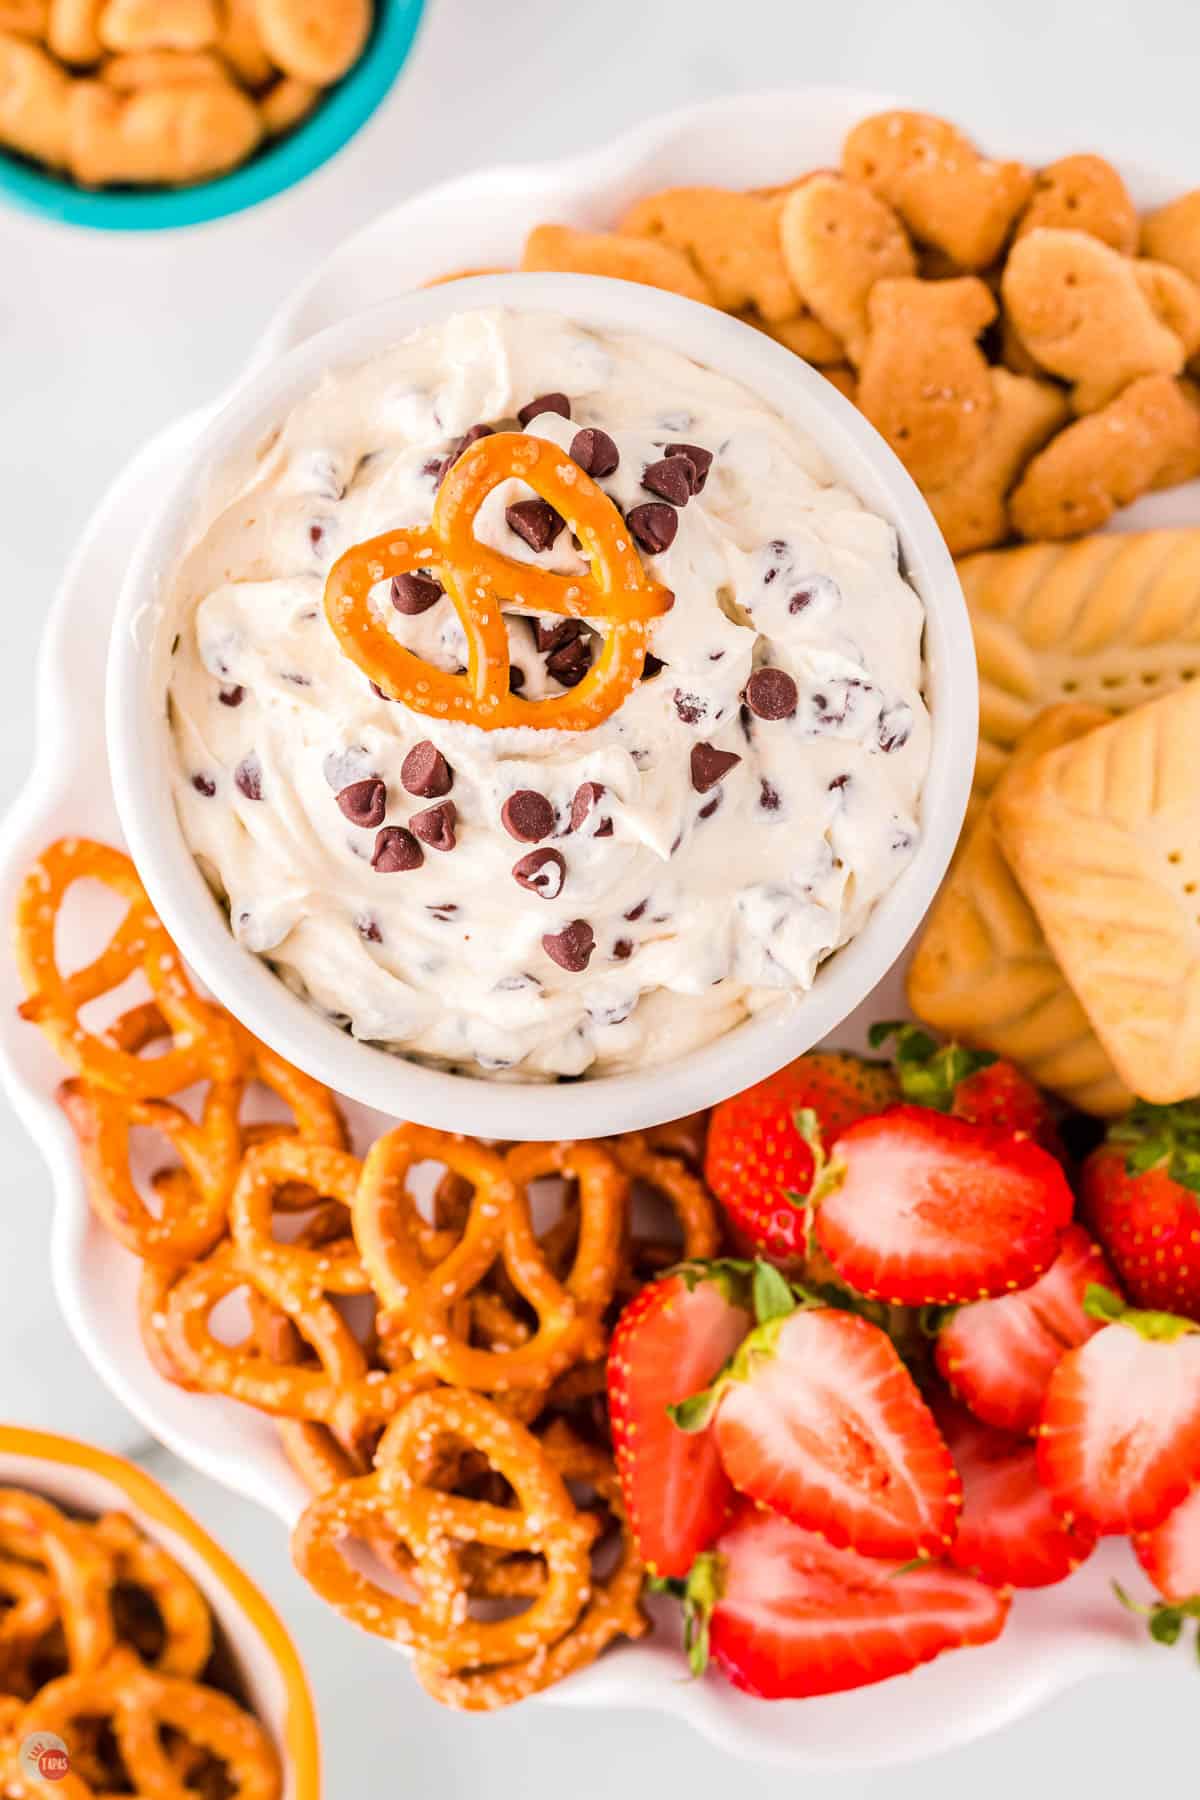 pretzel on top of bowl of Booty dip surrounded by strawberries